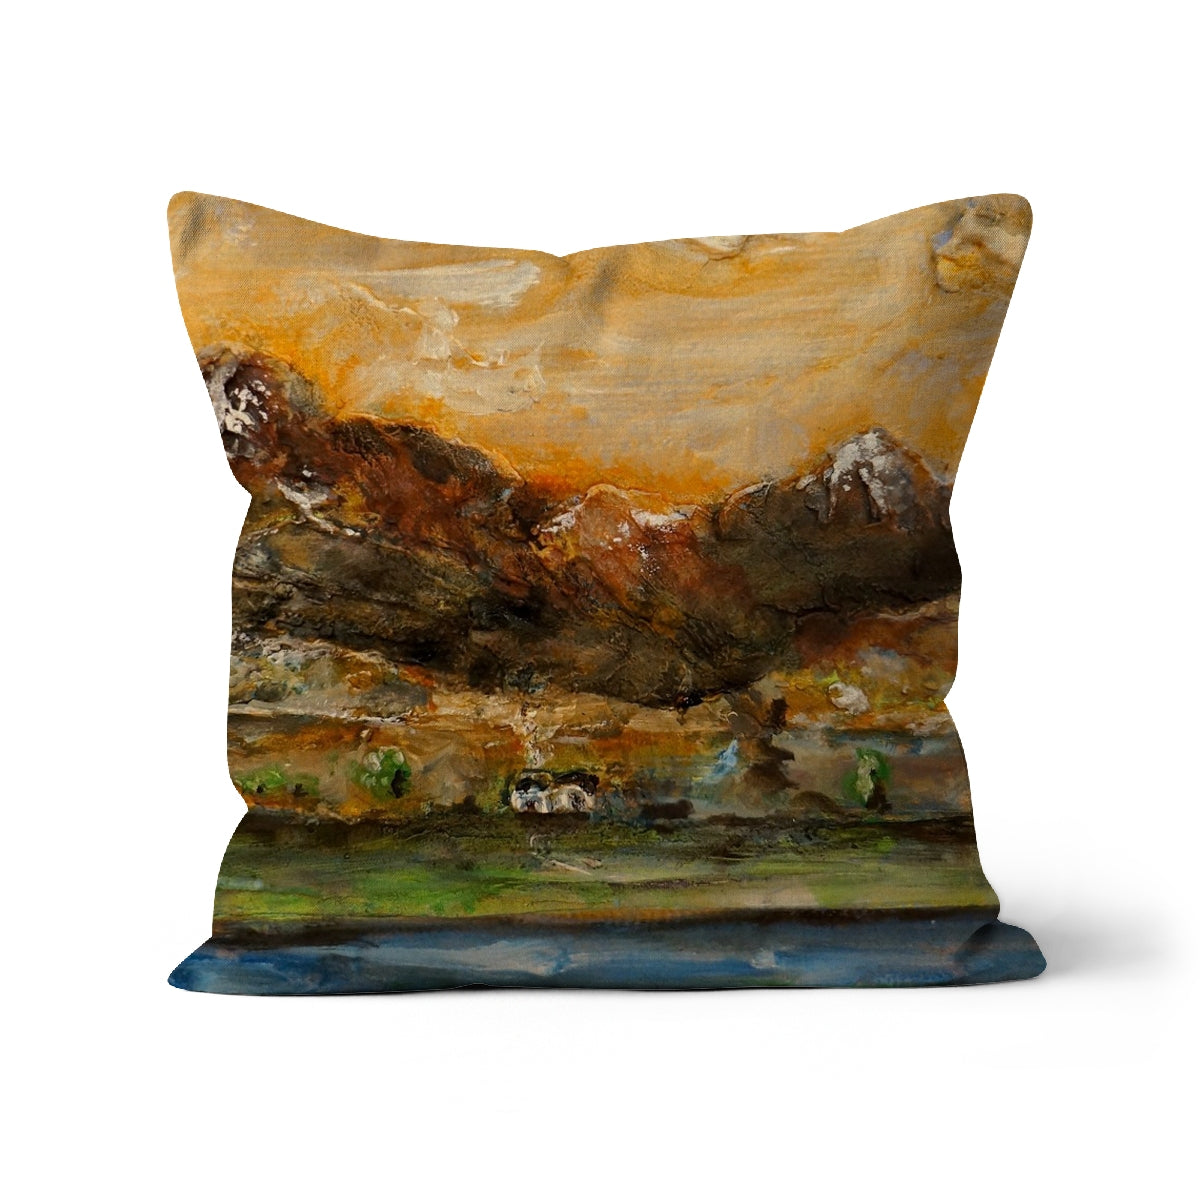 A Glencoe Cottage Art Gifts Cushion-Cushions-Glencoe Art Gallery-Faux Suede-12"x12"-Paintings, Prints, Homeware, Art Gifts From Scotland By Scottish Artist Kevin Hunter